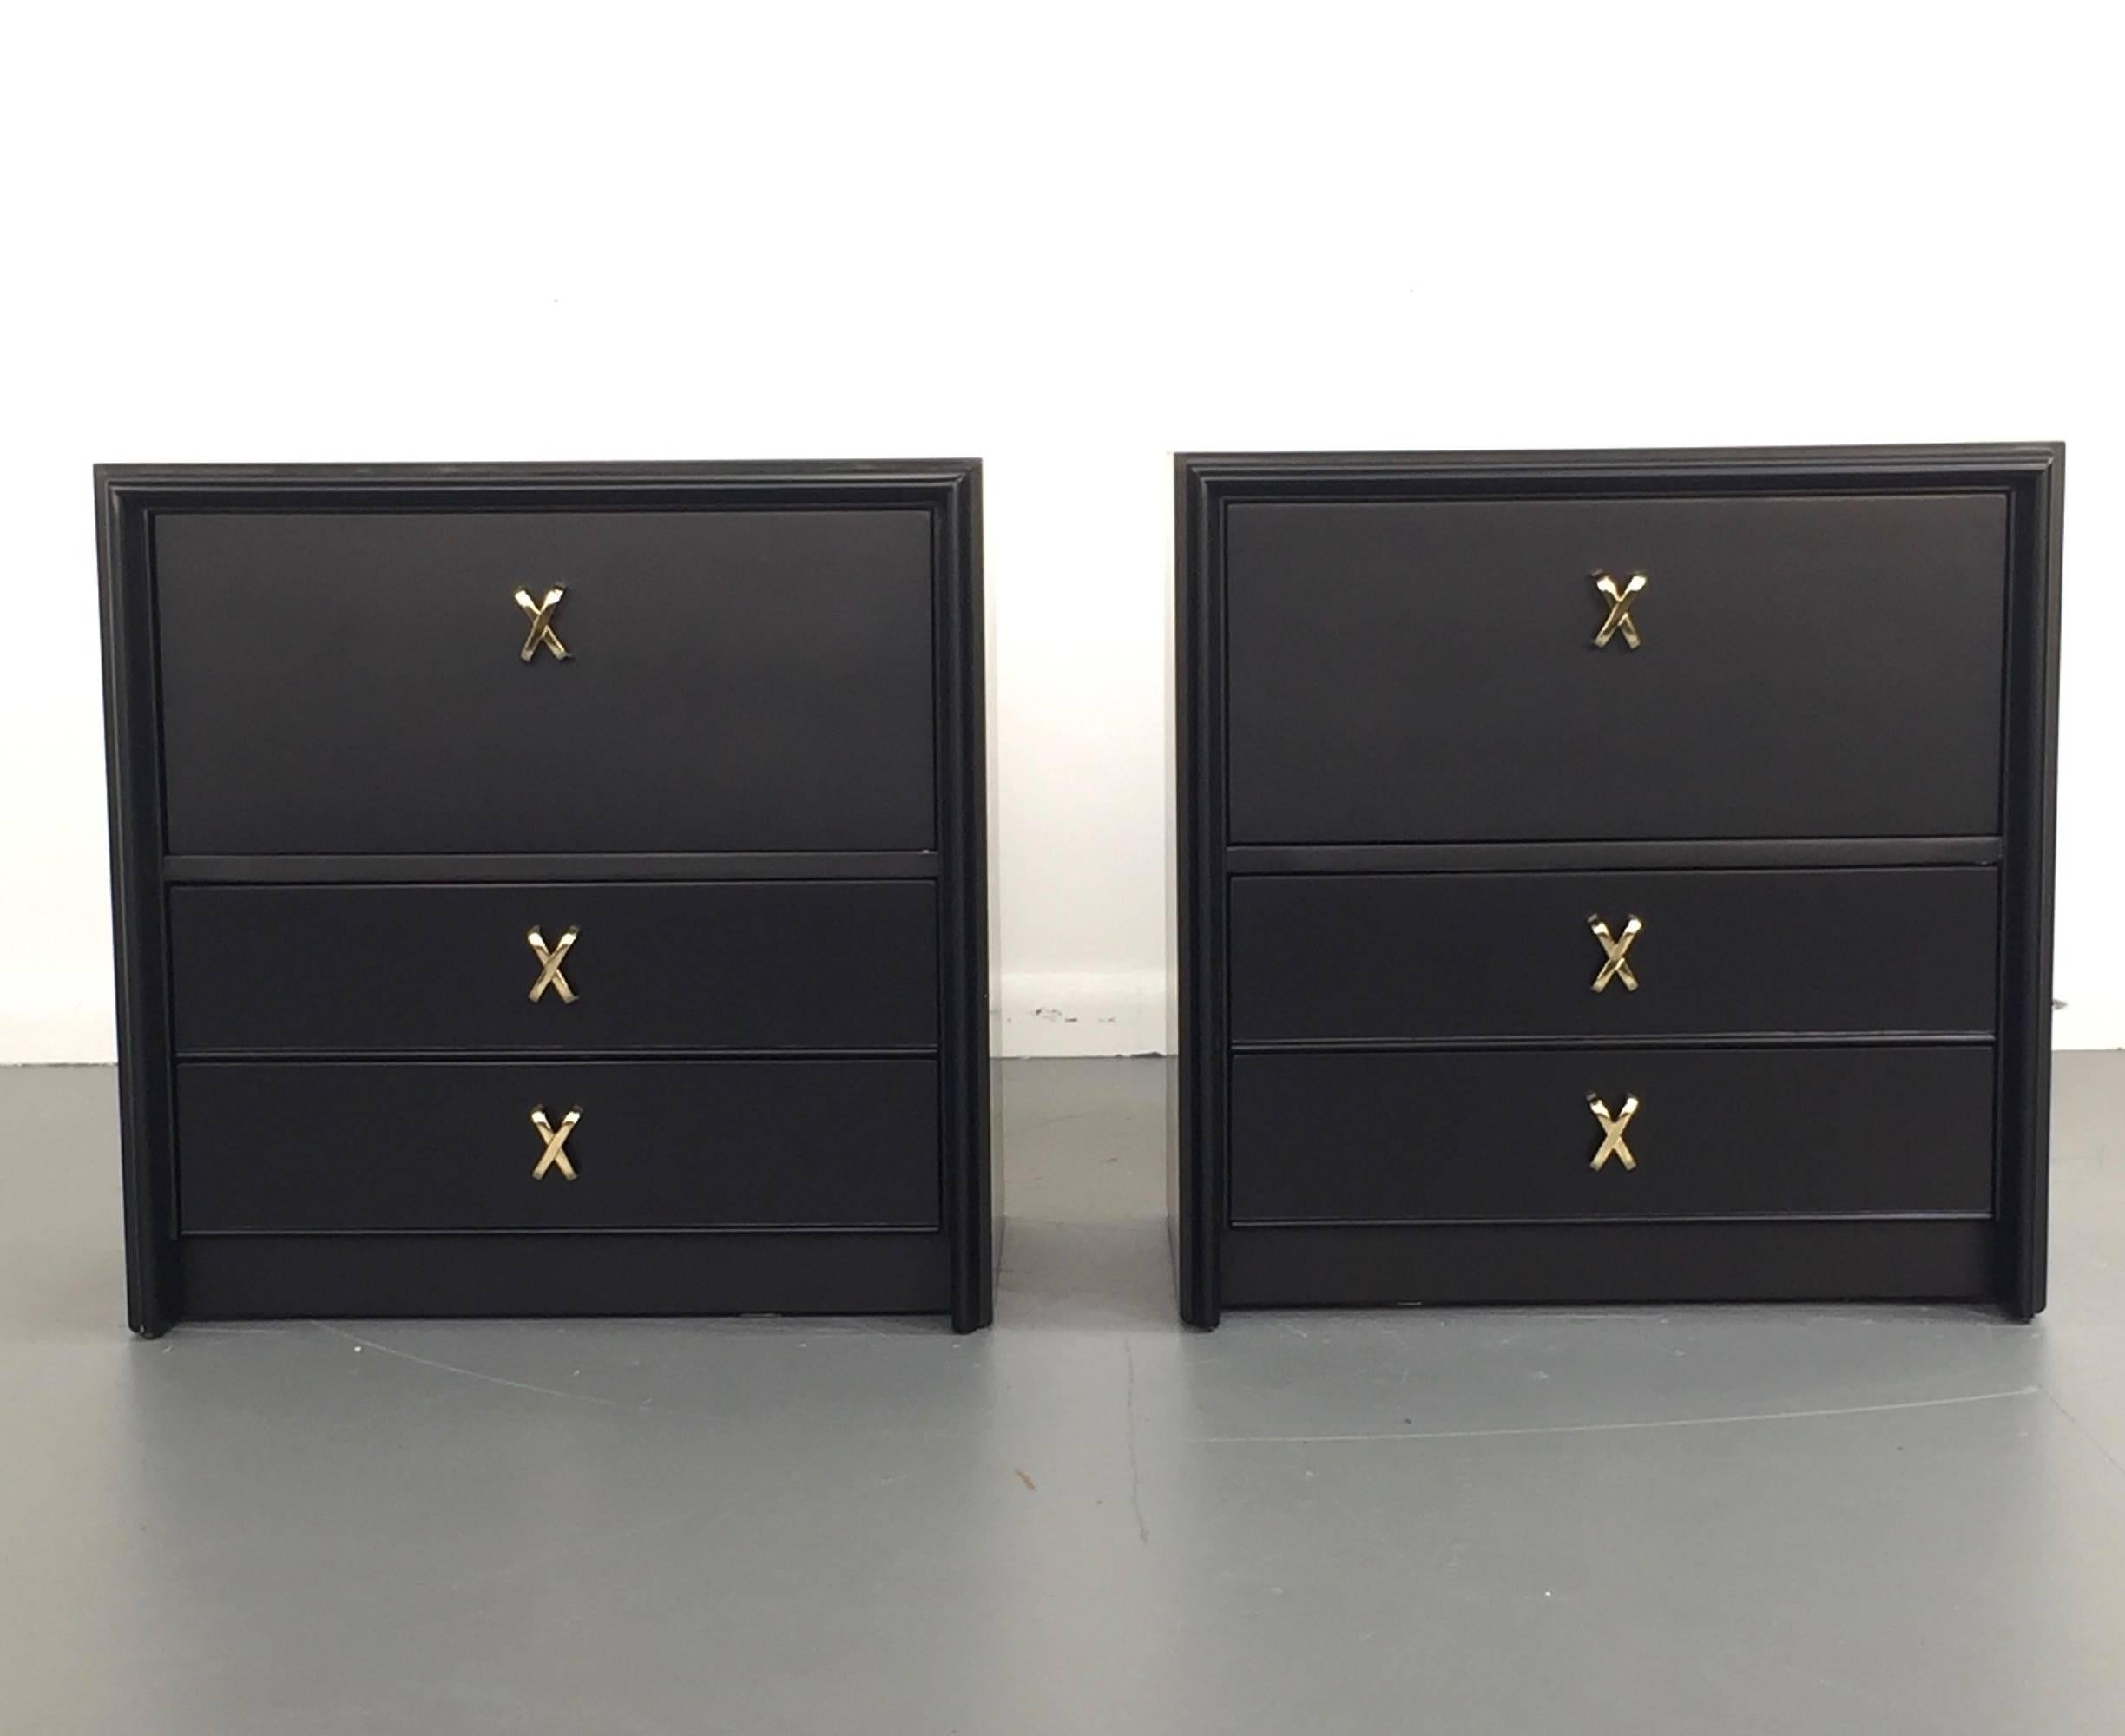 Pair of nightstands with "X" pulls designed by Paul Frankl in the 1950s for Johnson Furniture Company. Each nightstand has 2 drawers and a dropdown drawer accented by Frankl's signature "X" pulls. Newly refinished. 